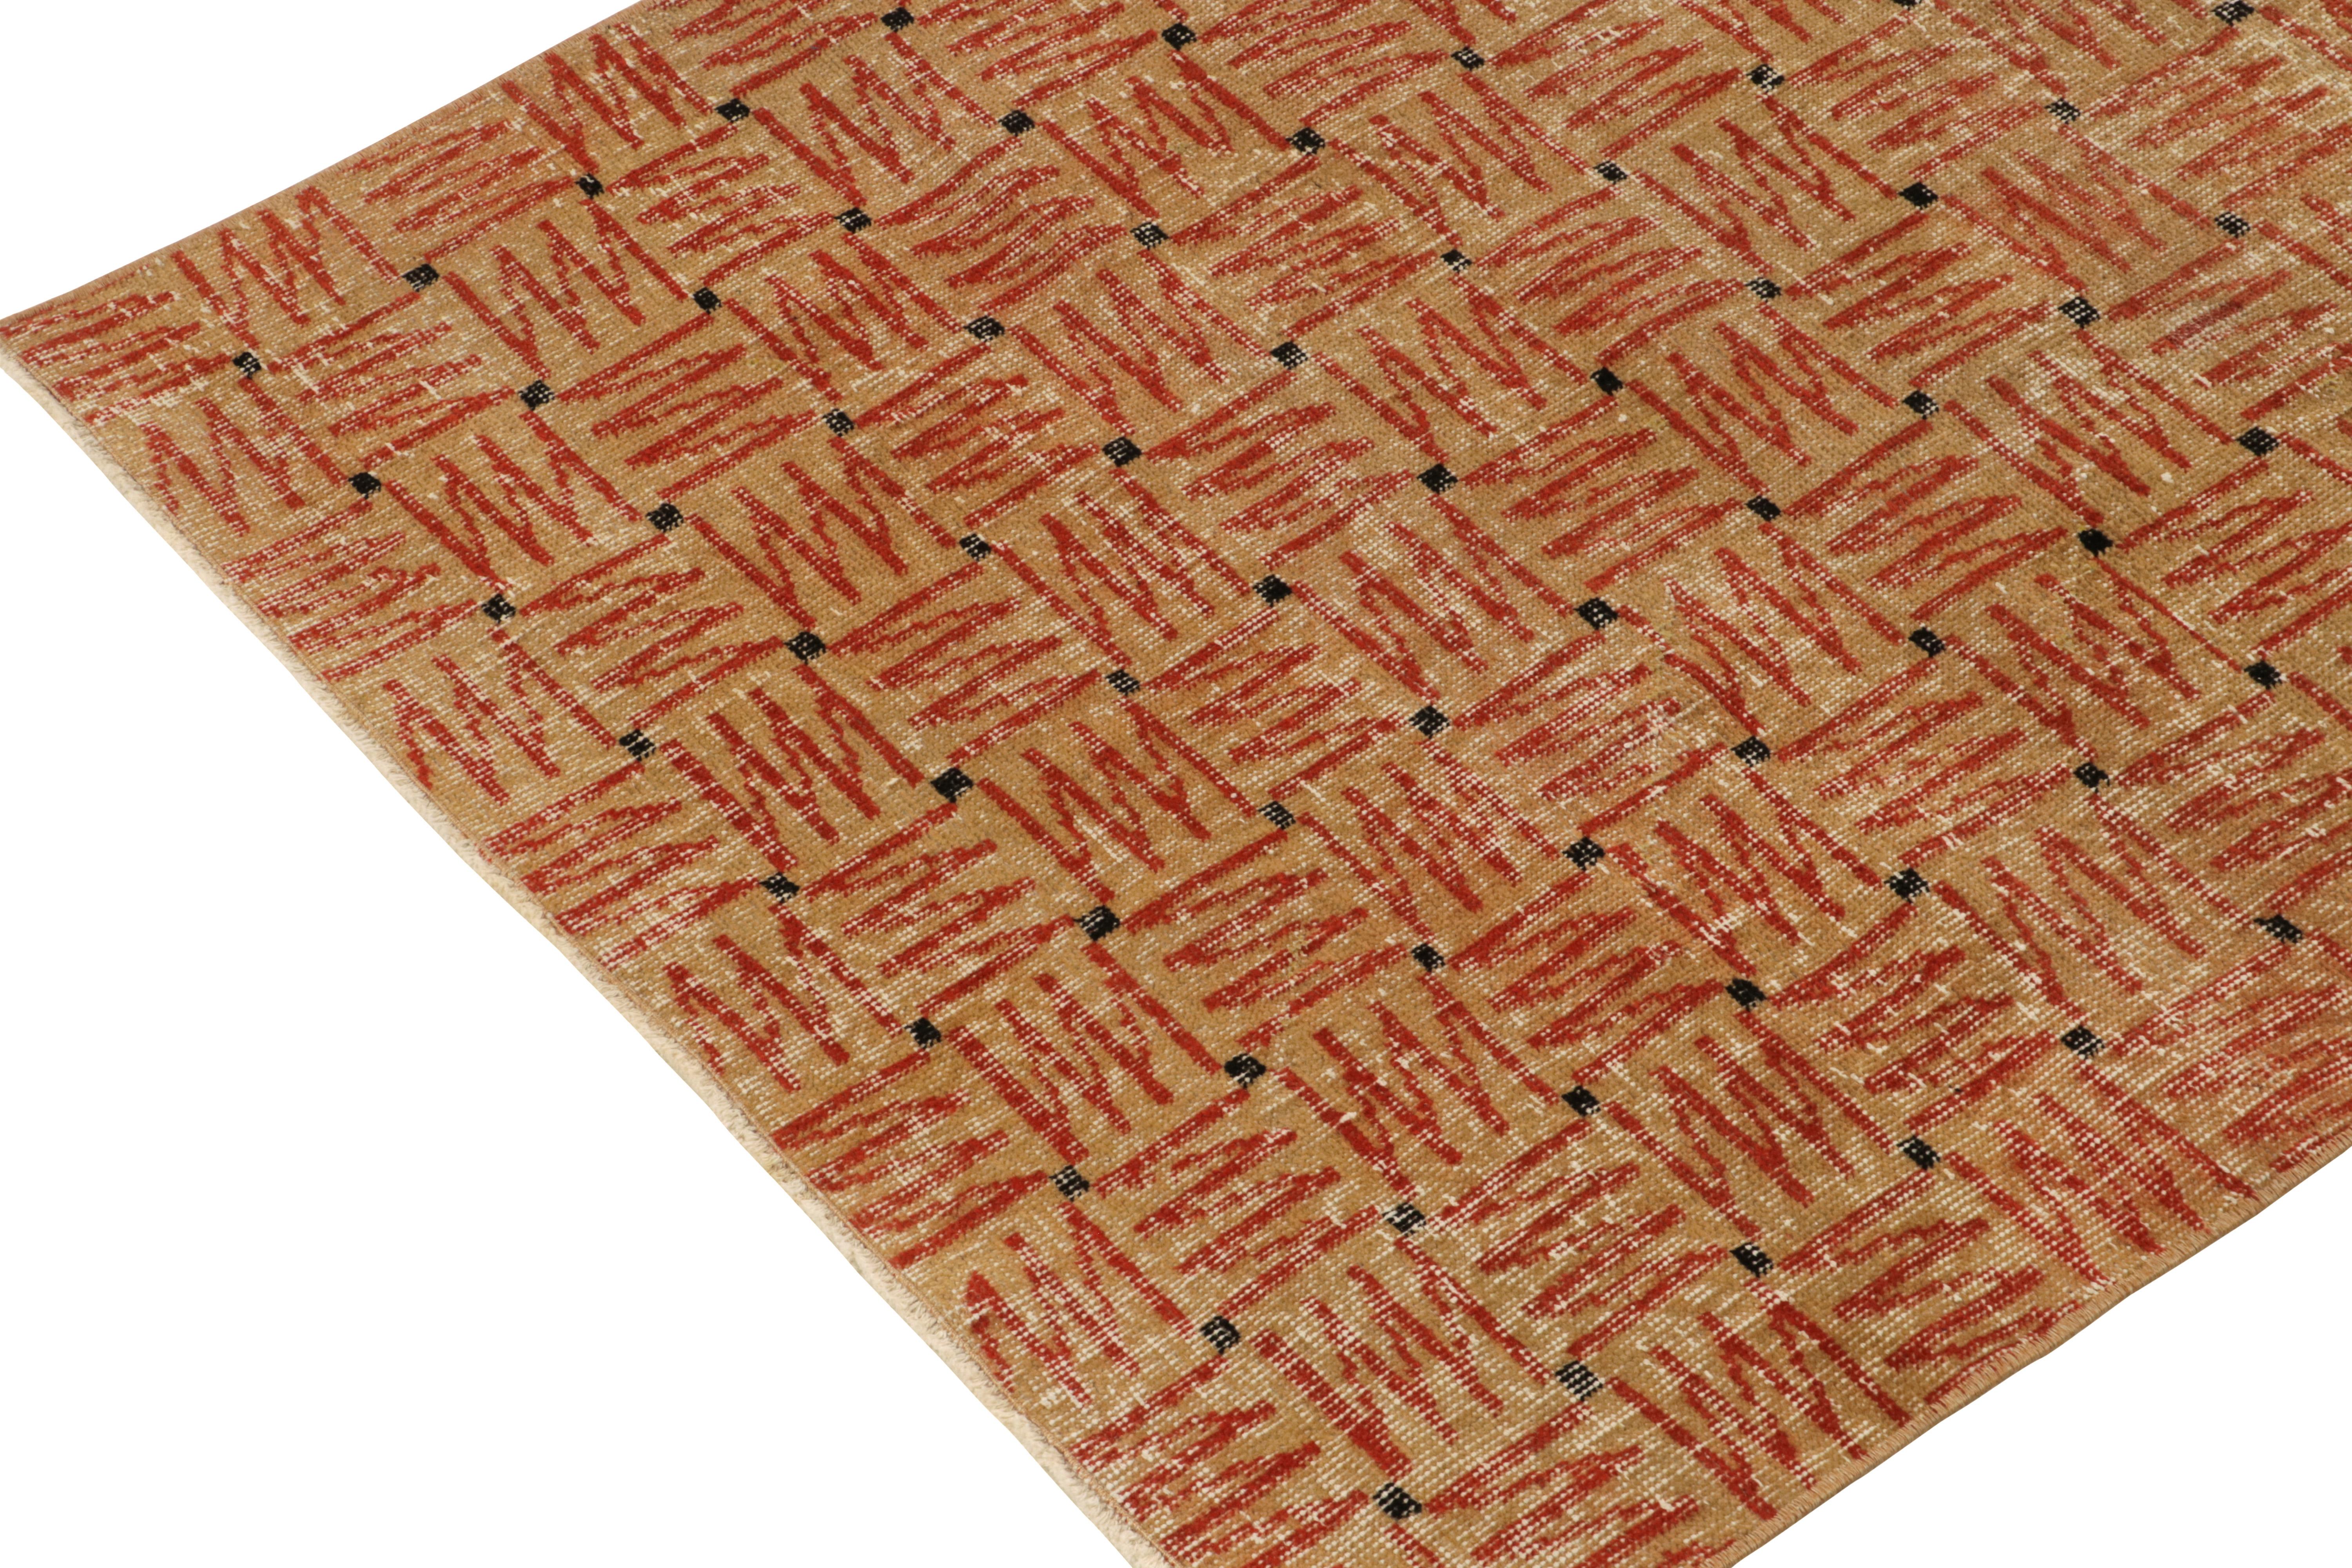 Turkish 1960s Vintage Deco Rug in Beige-Brown and Red Geometric Patterns, by Rug & Kilim For Sale